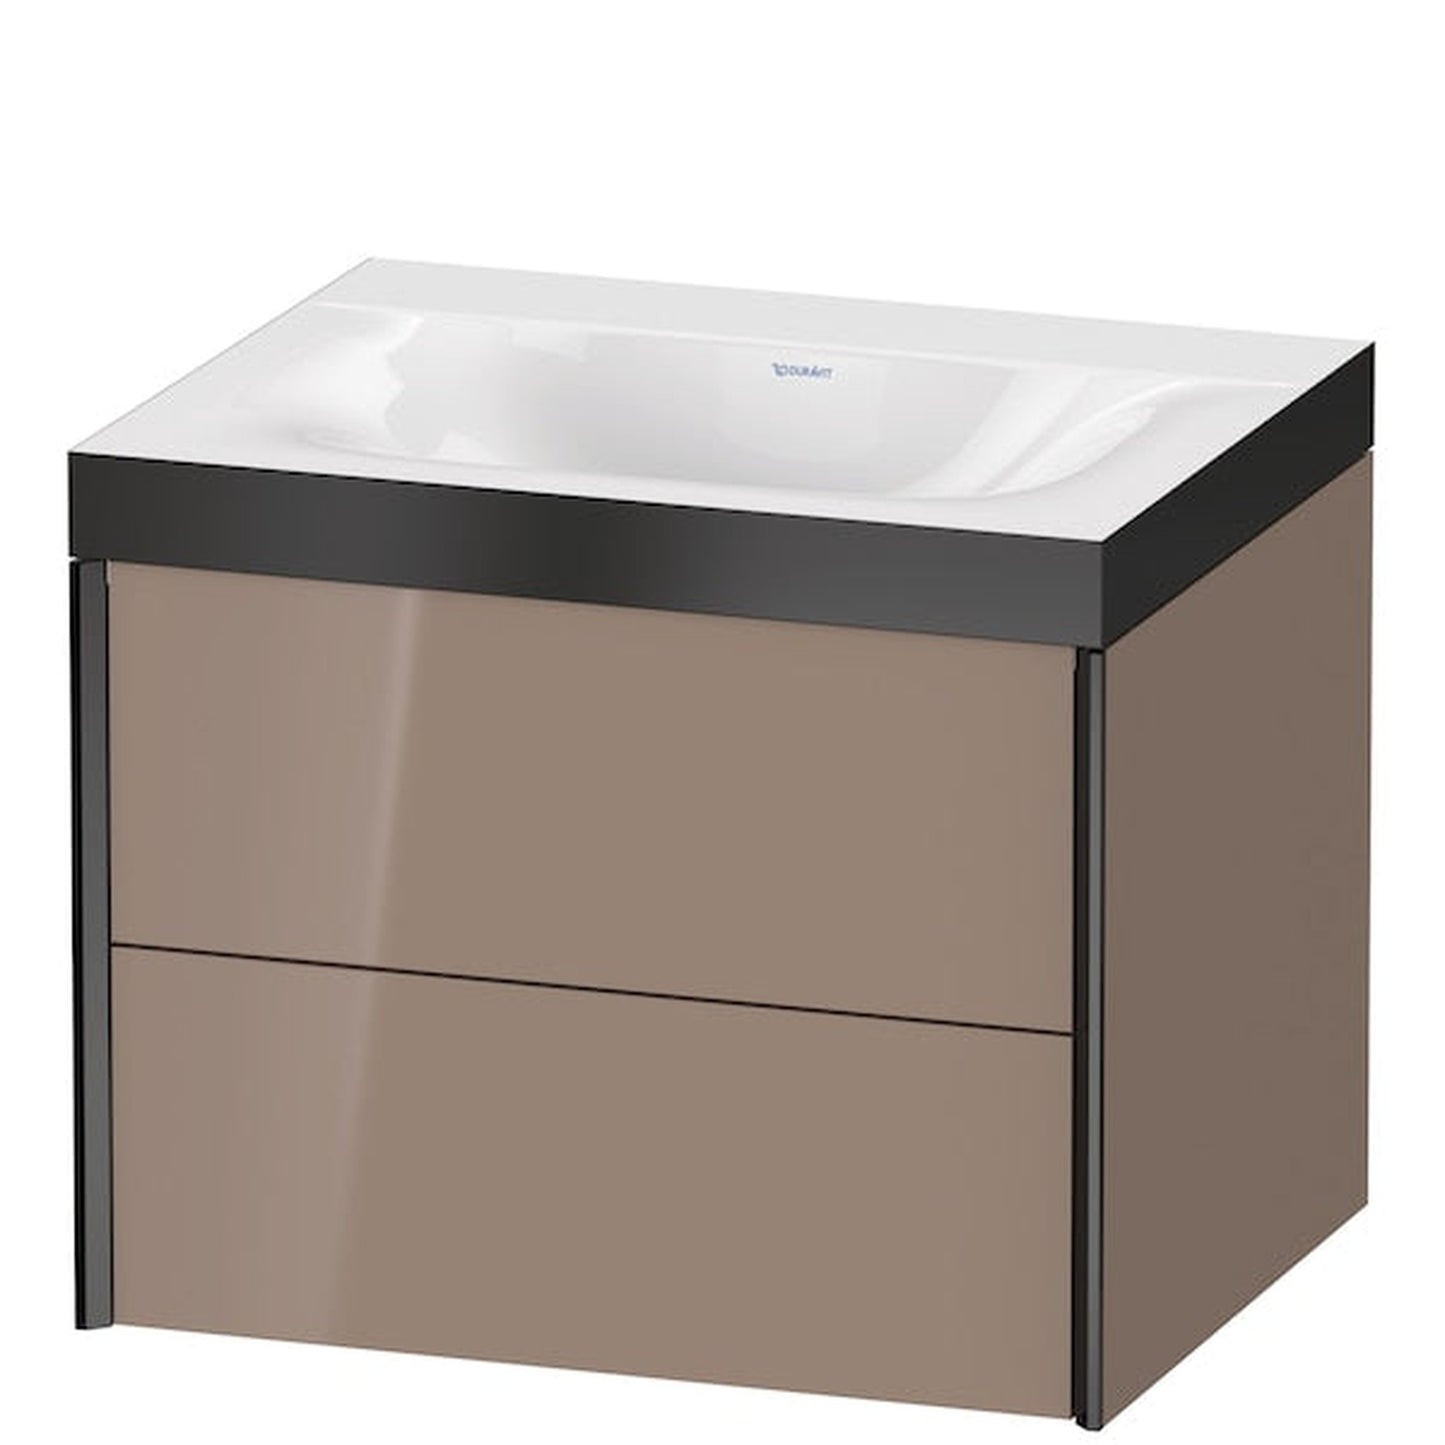 Duravit Xviu 24" x 20" x 19" Two Drawer C-Bonded Wall-Mount Vanity Kit Without Tap Hole, Cappuccino (XV4614NB286P)